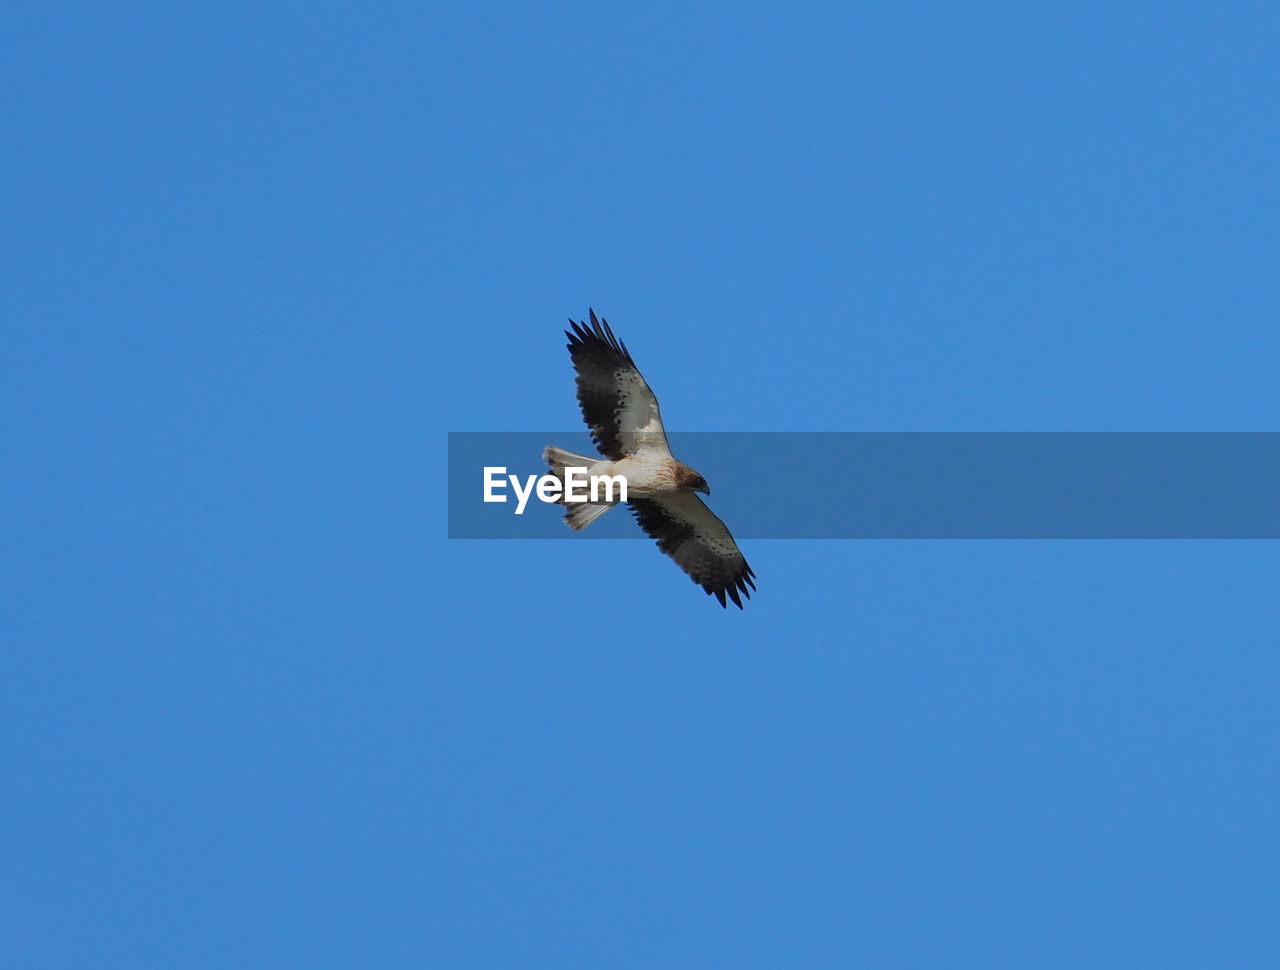 LOW ANGLE VIEW OF EAGLE FLYING IN CLEAR SKY